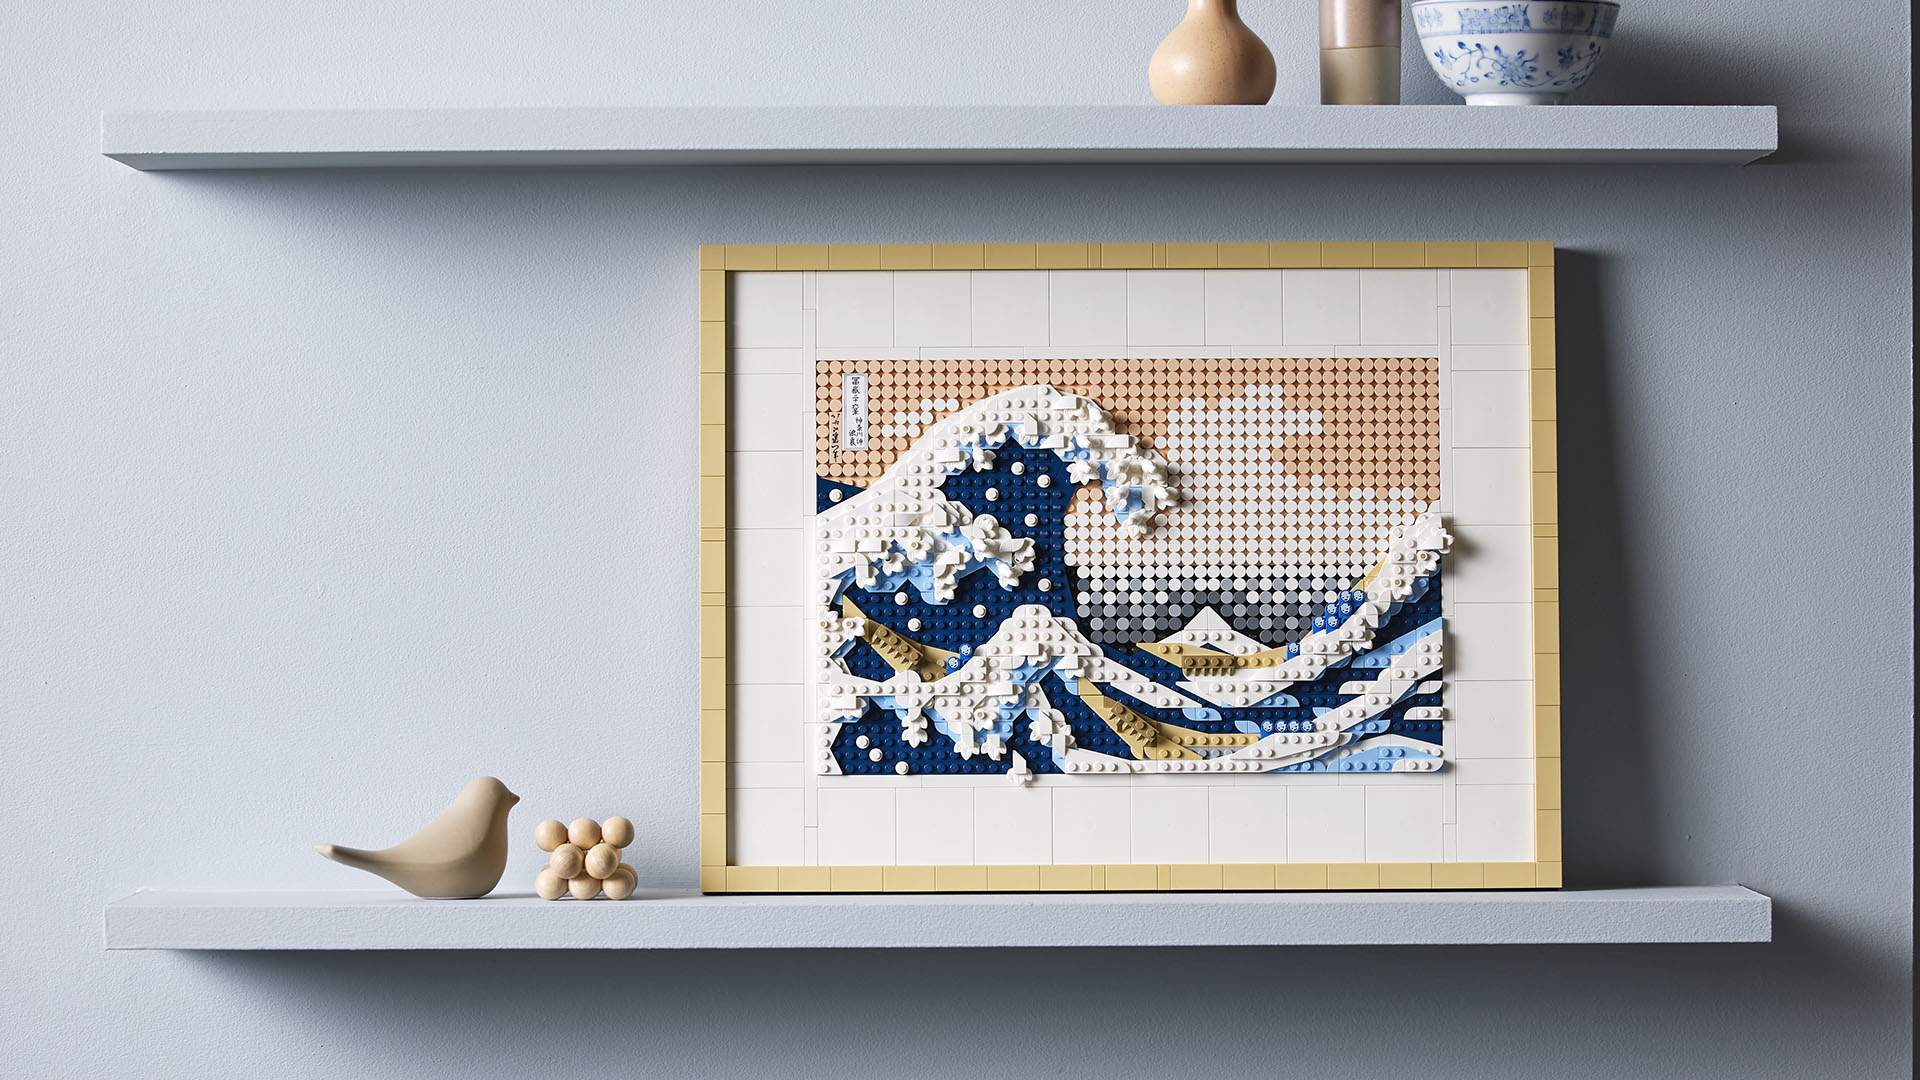 Lego's Stunning New 'Great Wave' Set Will Let You Recreate Hokusai's Masterpiece at Home